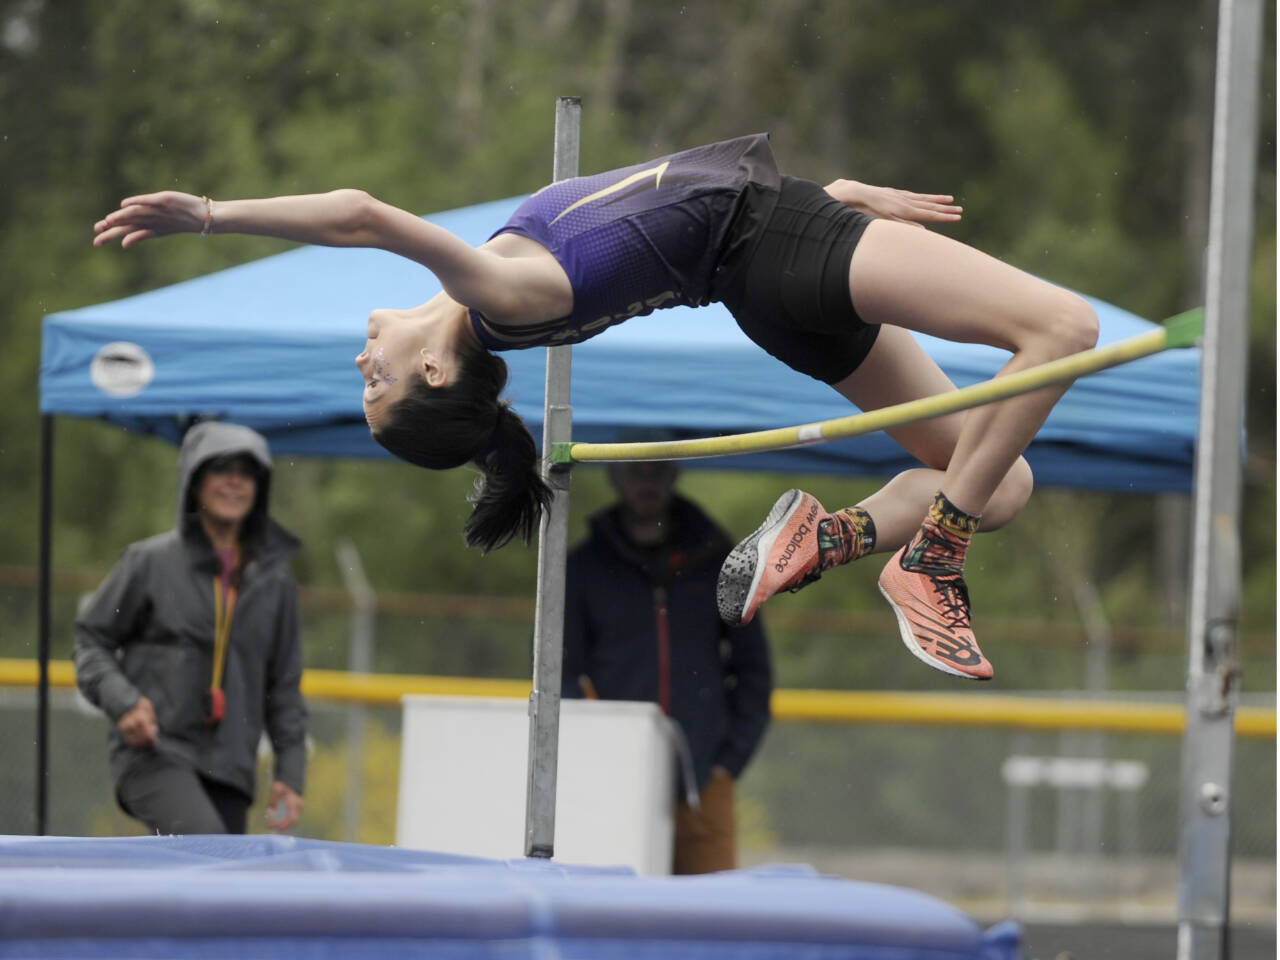 Sequim's Clare Turella cleared 5 feet, 3 inches Saturday to win the bidistrict track and field meet championship in Belfair. (Michael Dashiell/Olympic Peninsula News Group)